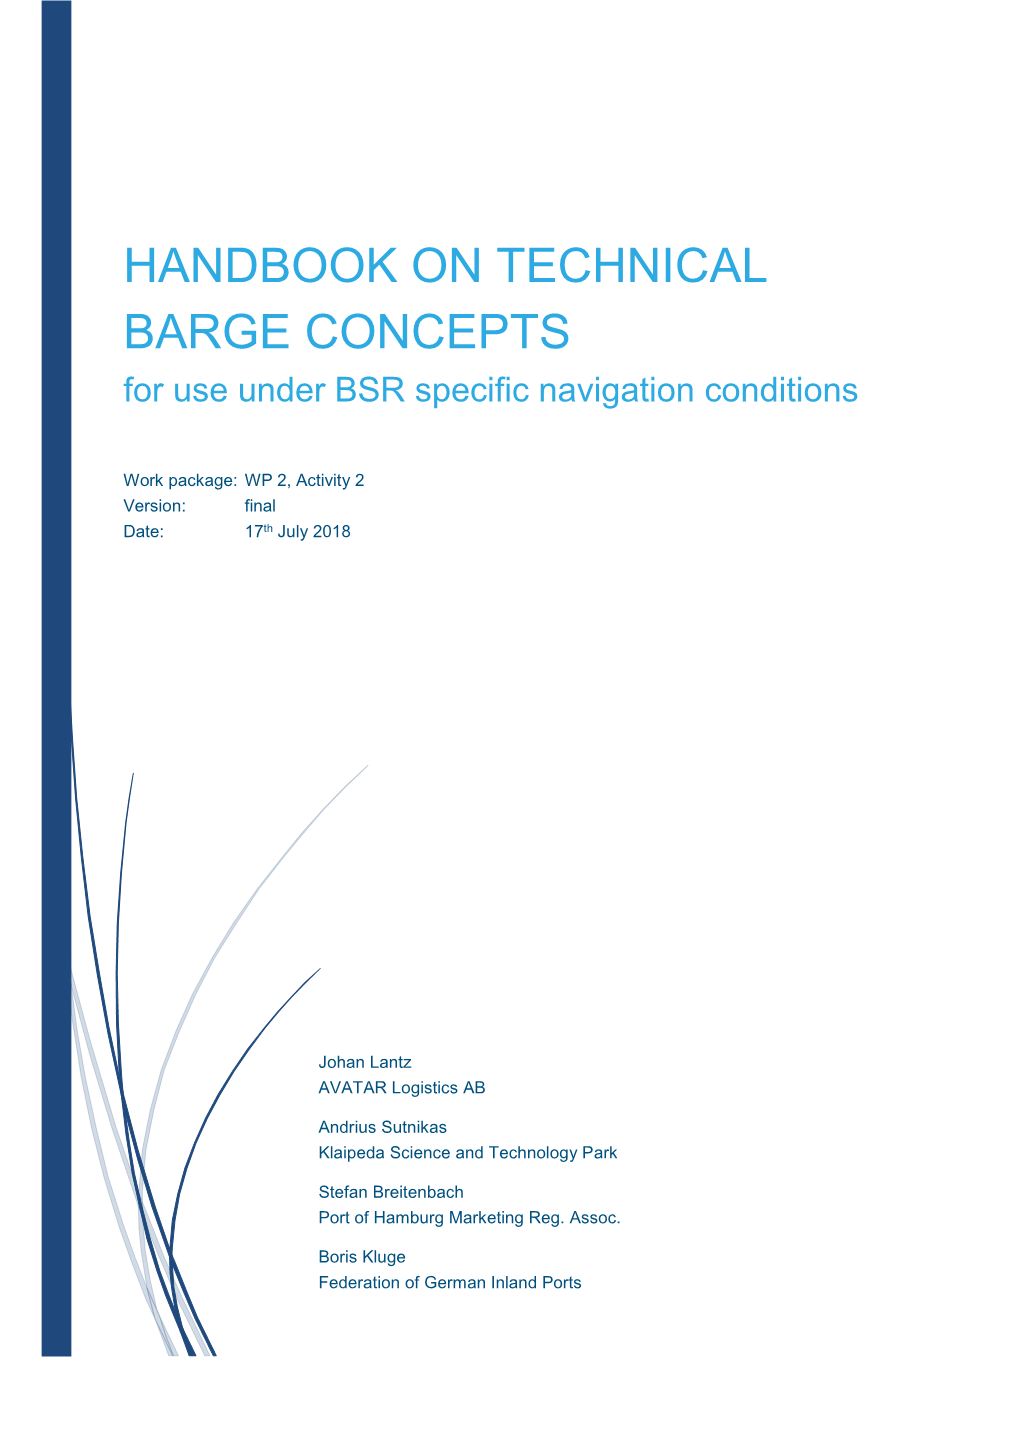 HANDBOOK on TECHNICAL BARGE CONCEPTS for Use Under BSR Specific Navigation Conditions